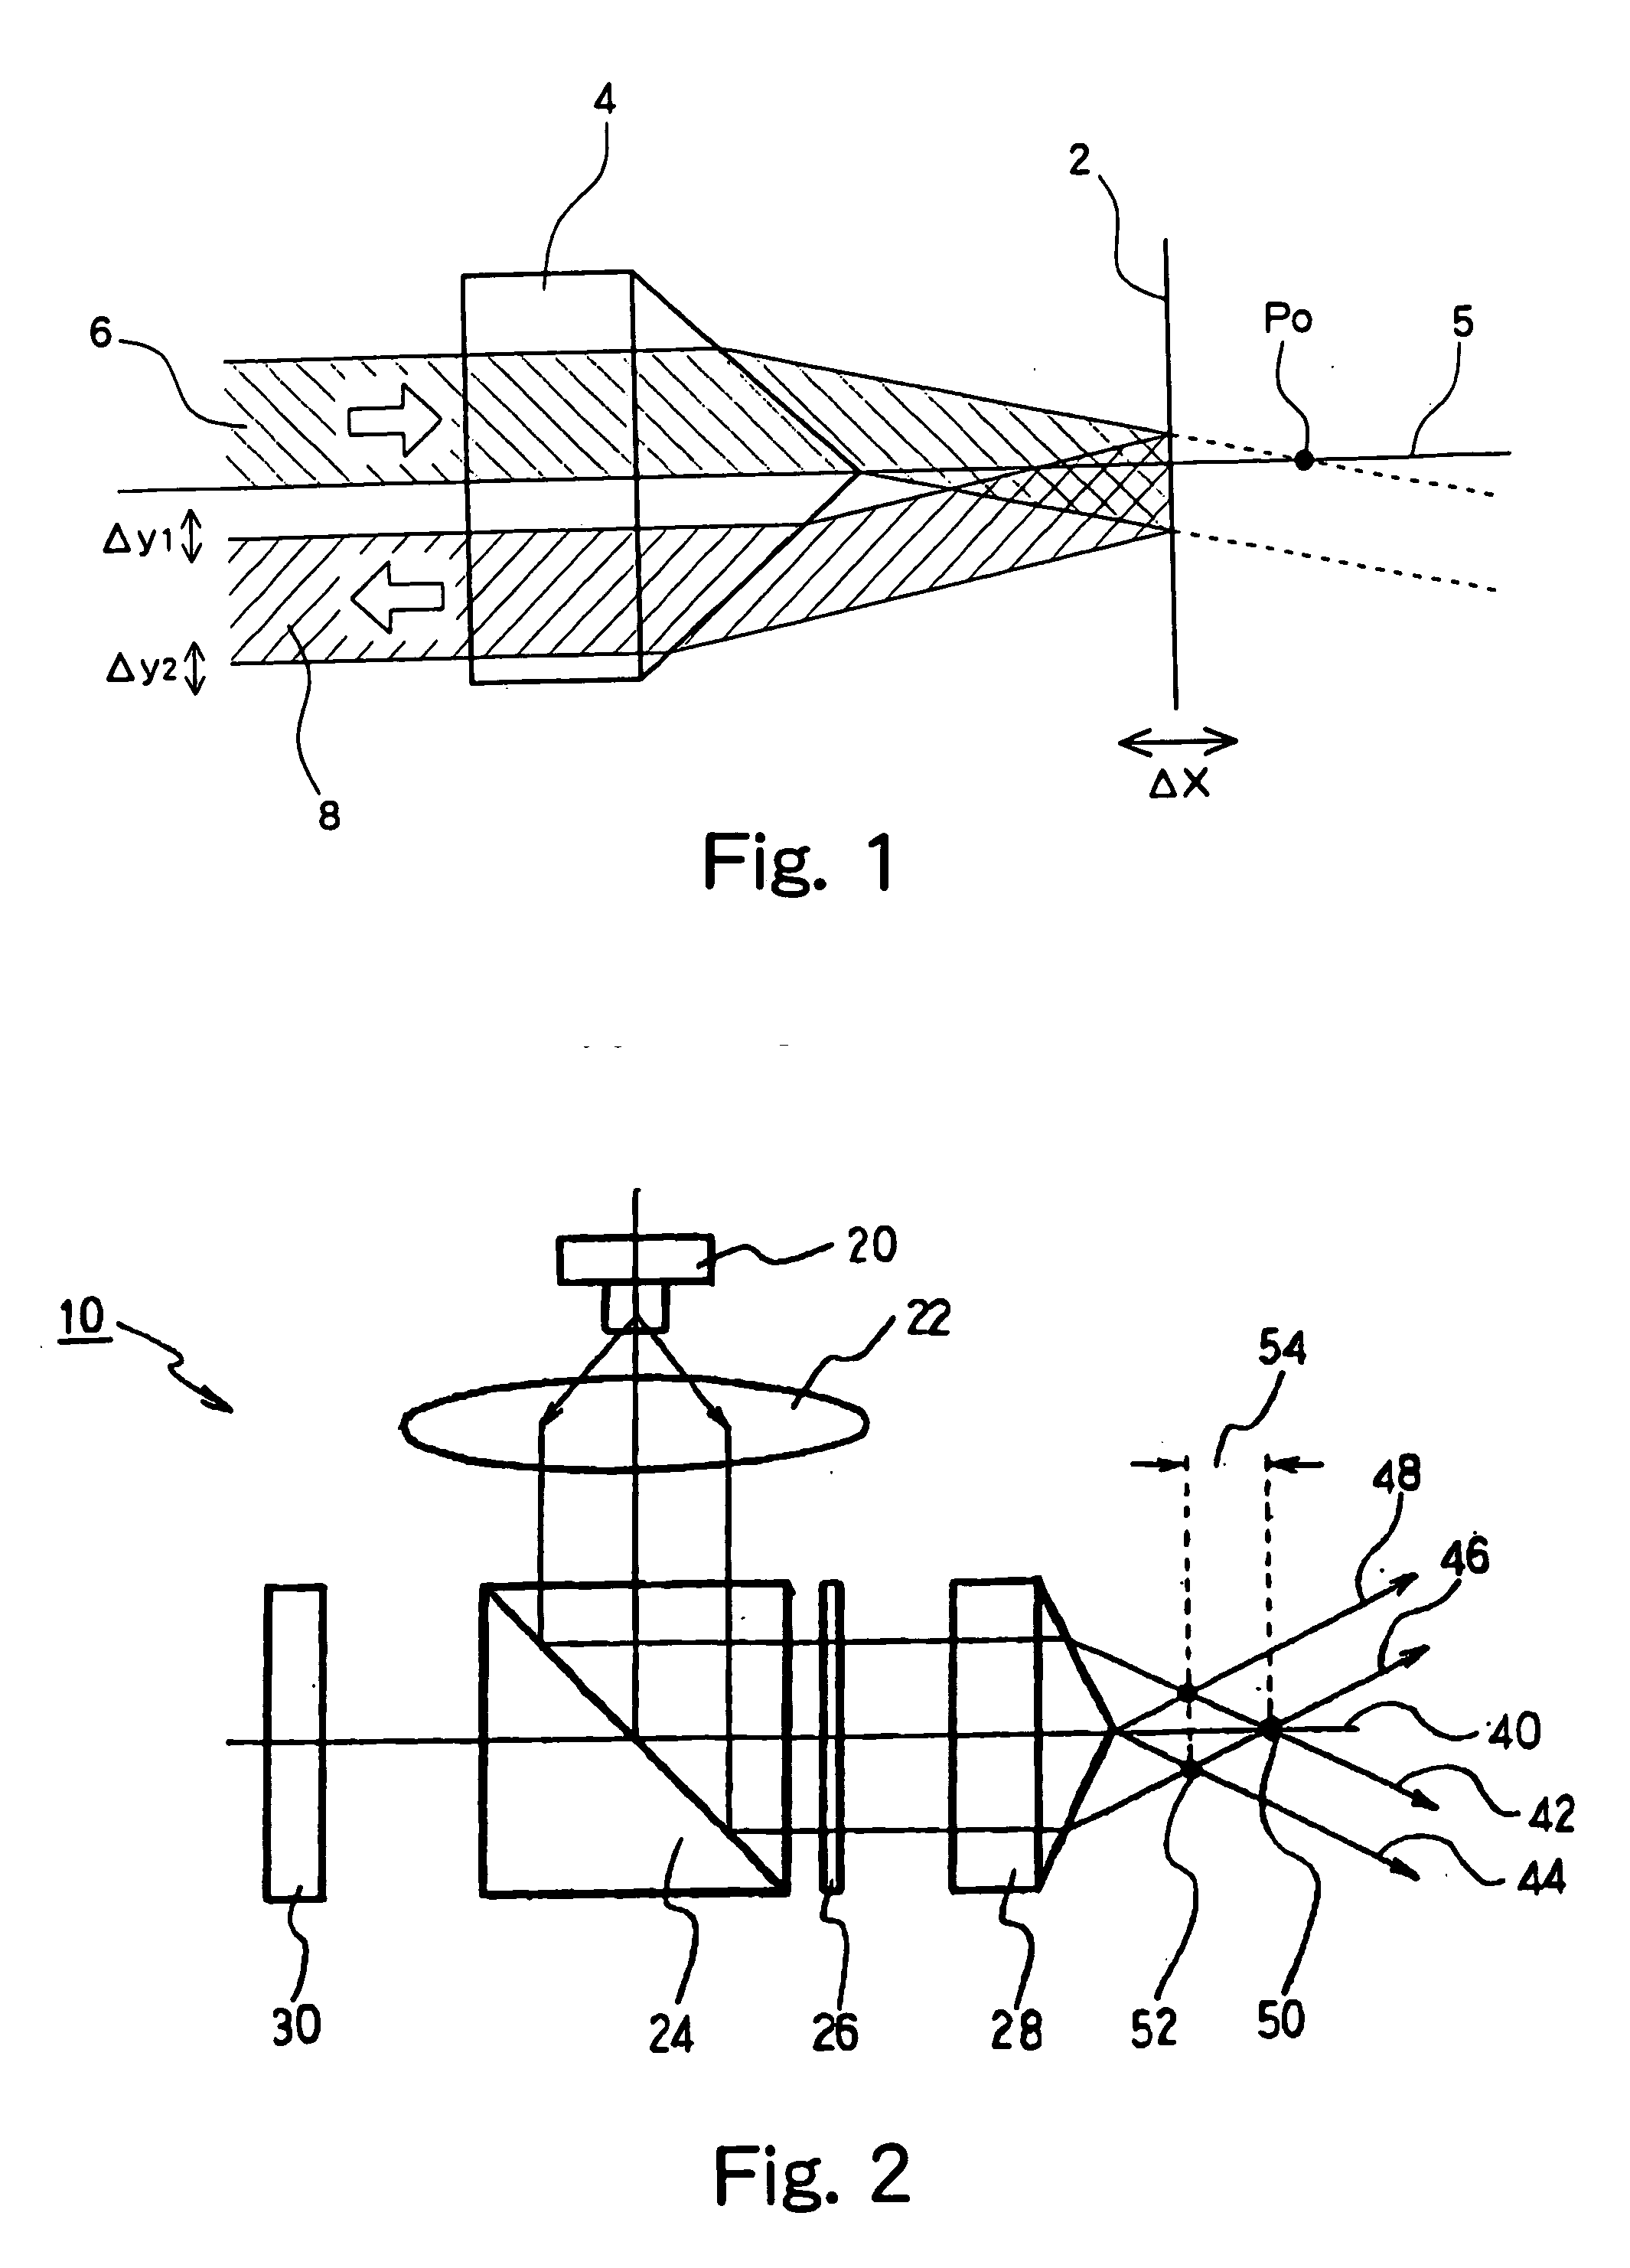 Optical displacement measurement device